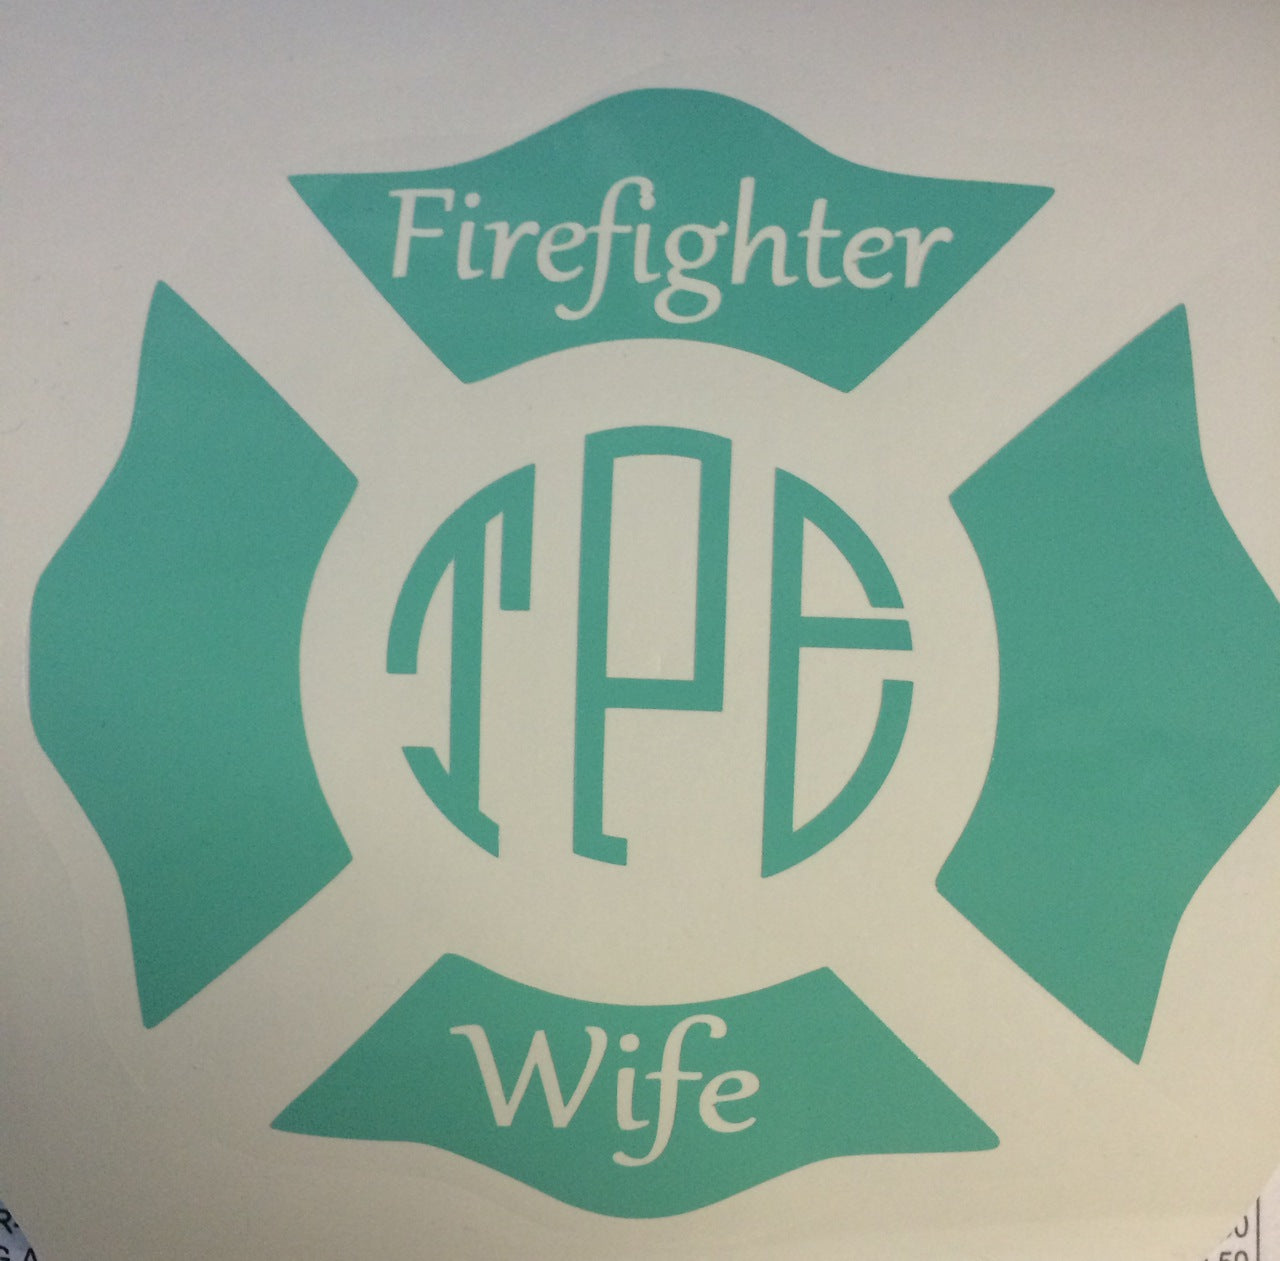 Firefighter Wife Monogrammed Decal